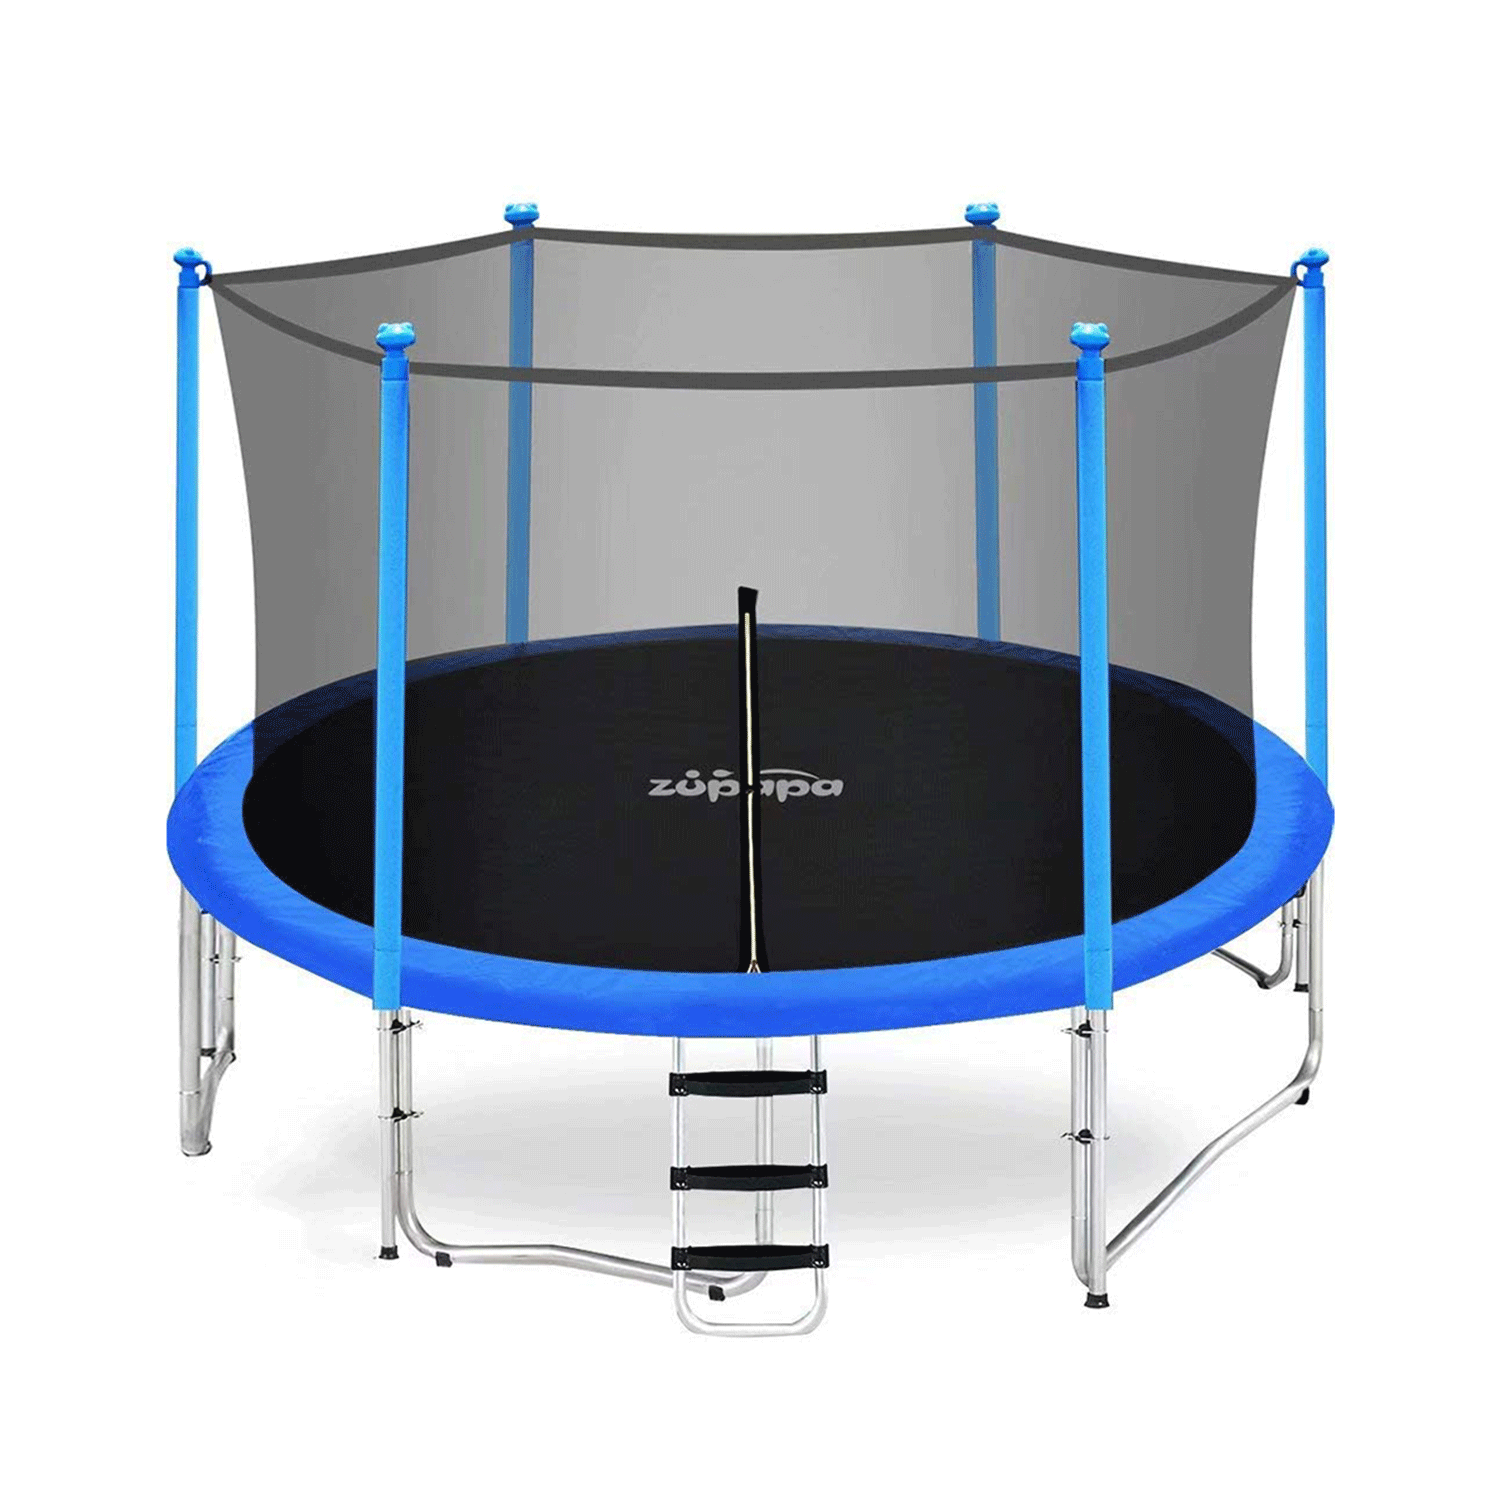 Zupapa 15 14 12 10 8ft Kids Trampoline 425LBS Weight Capacity with Enclosure Net Include All Accessories